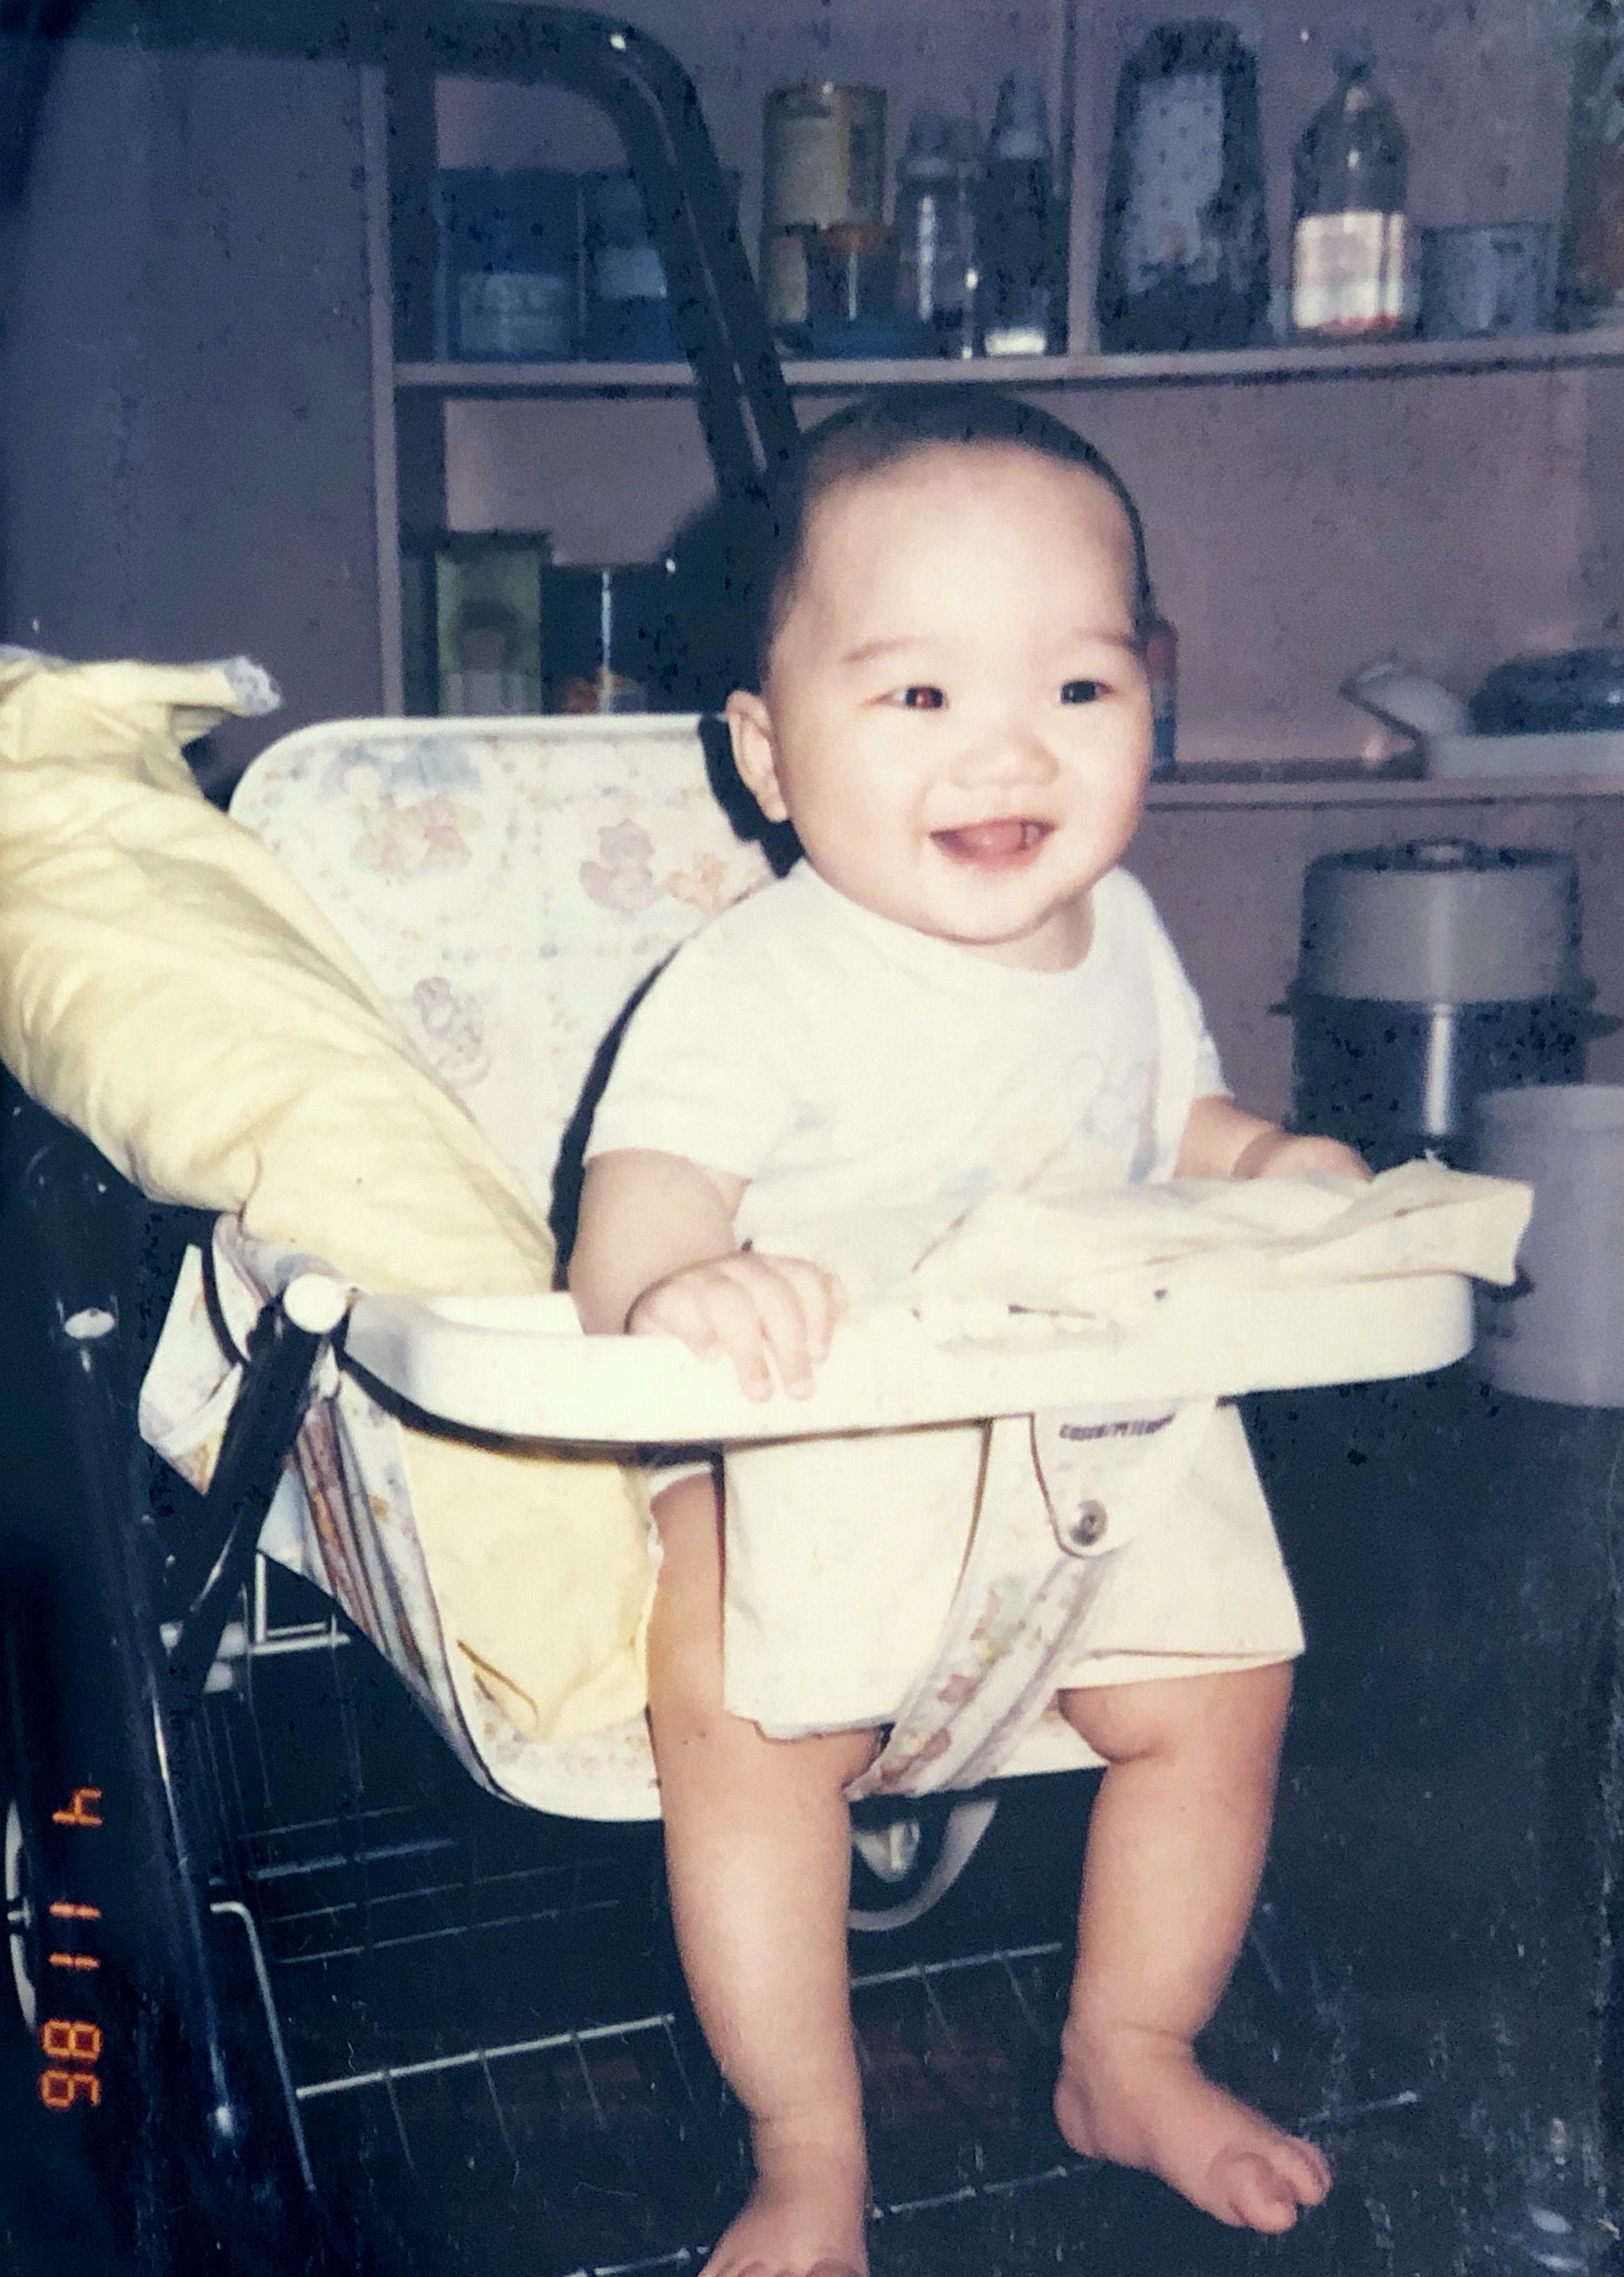 Michael at 6 months in his stroller. 1986